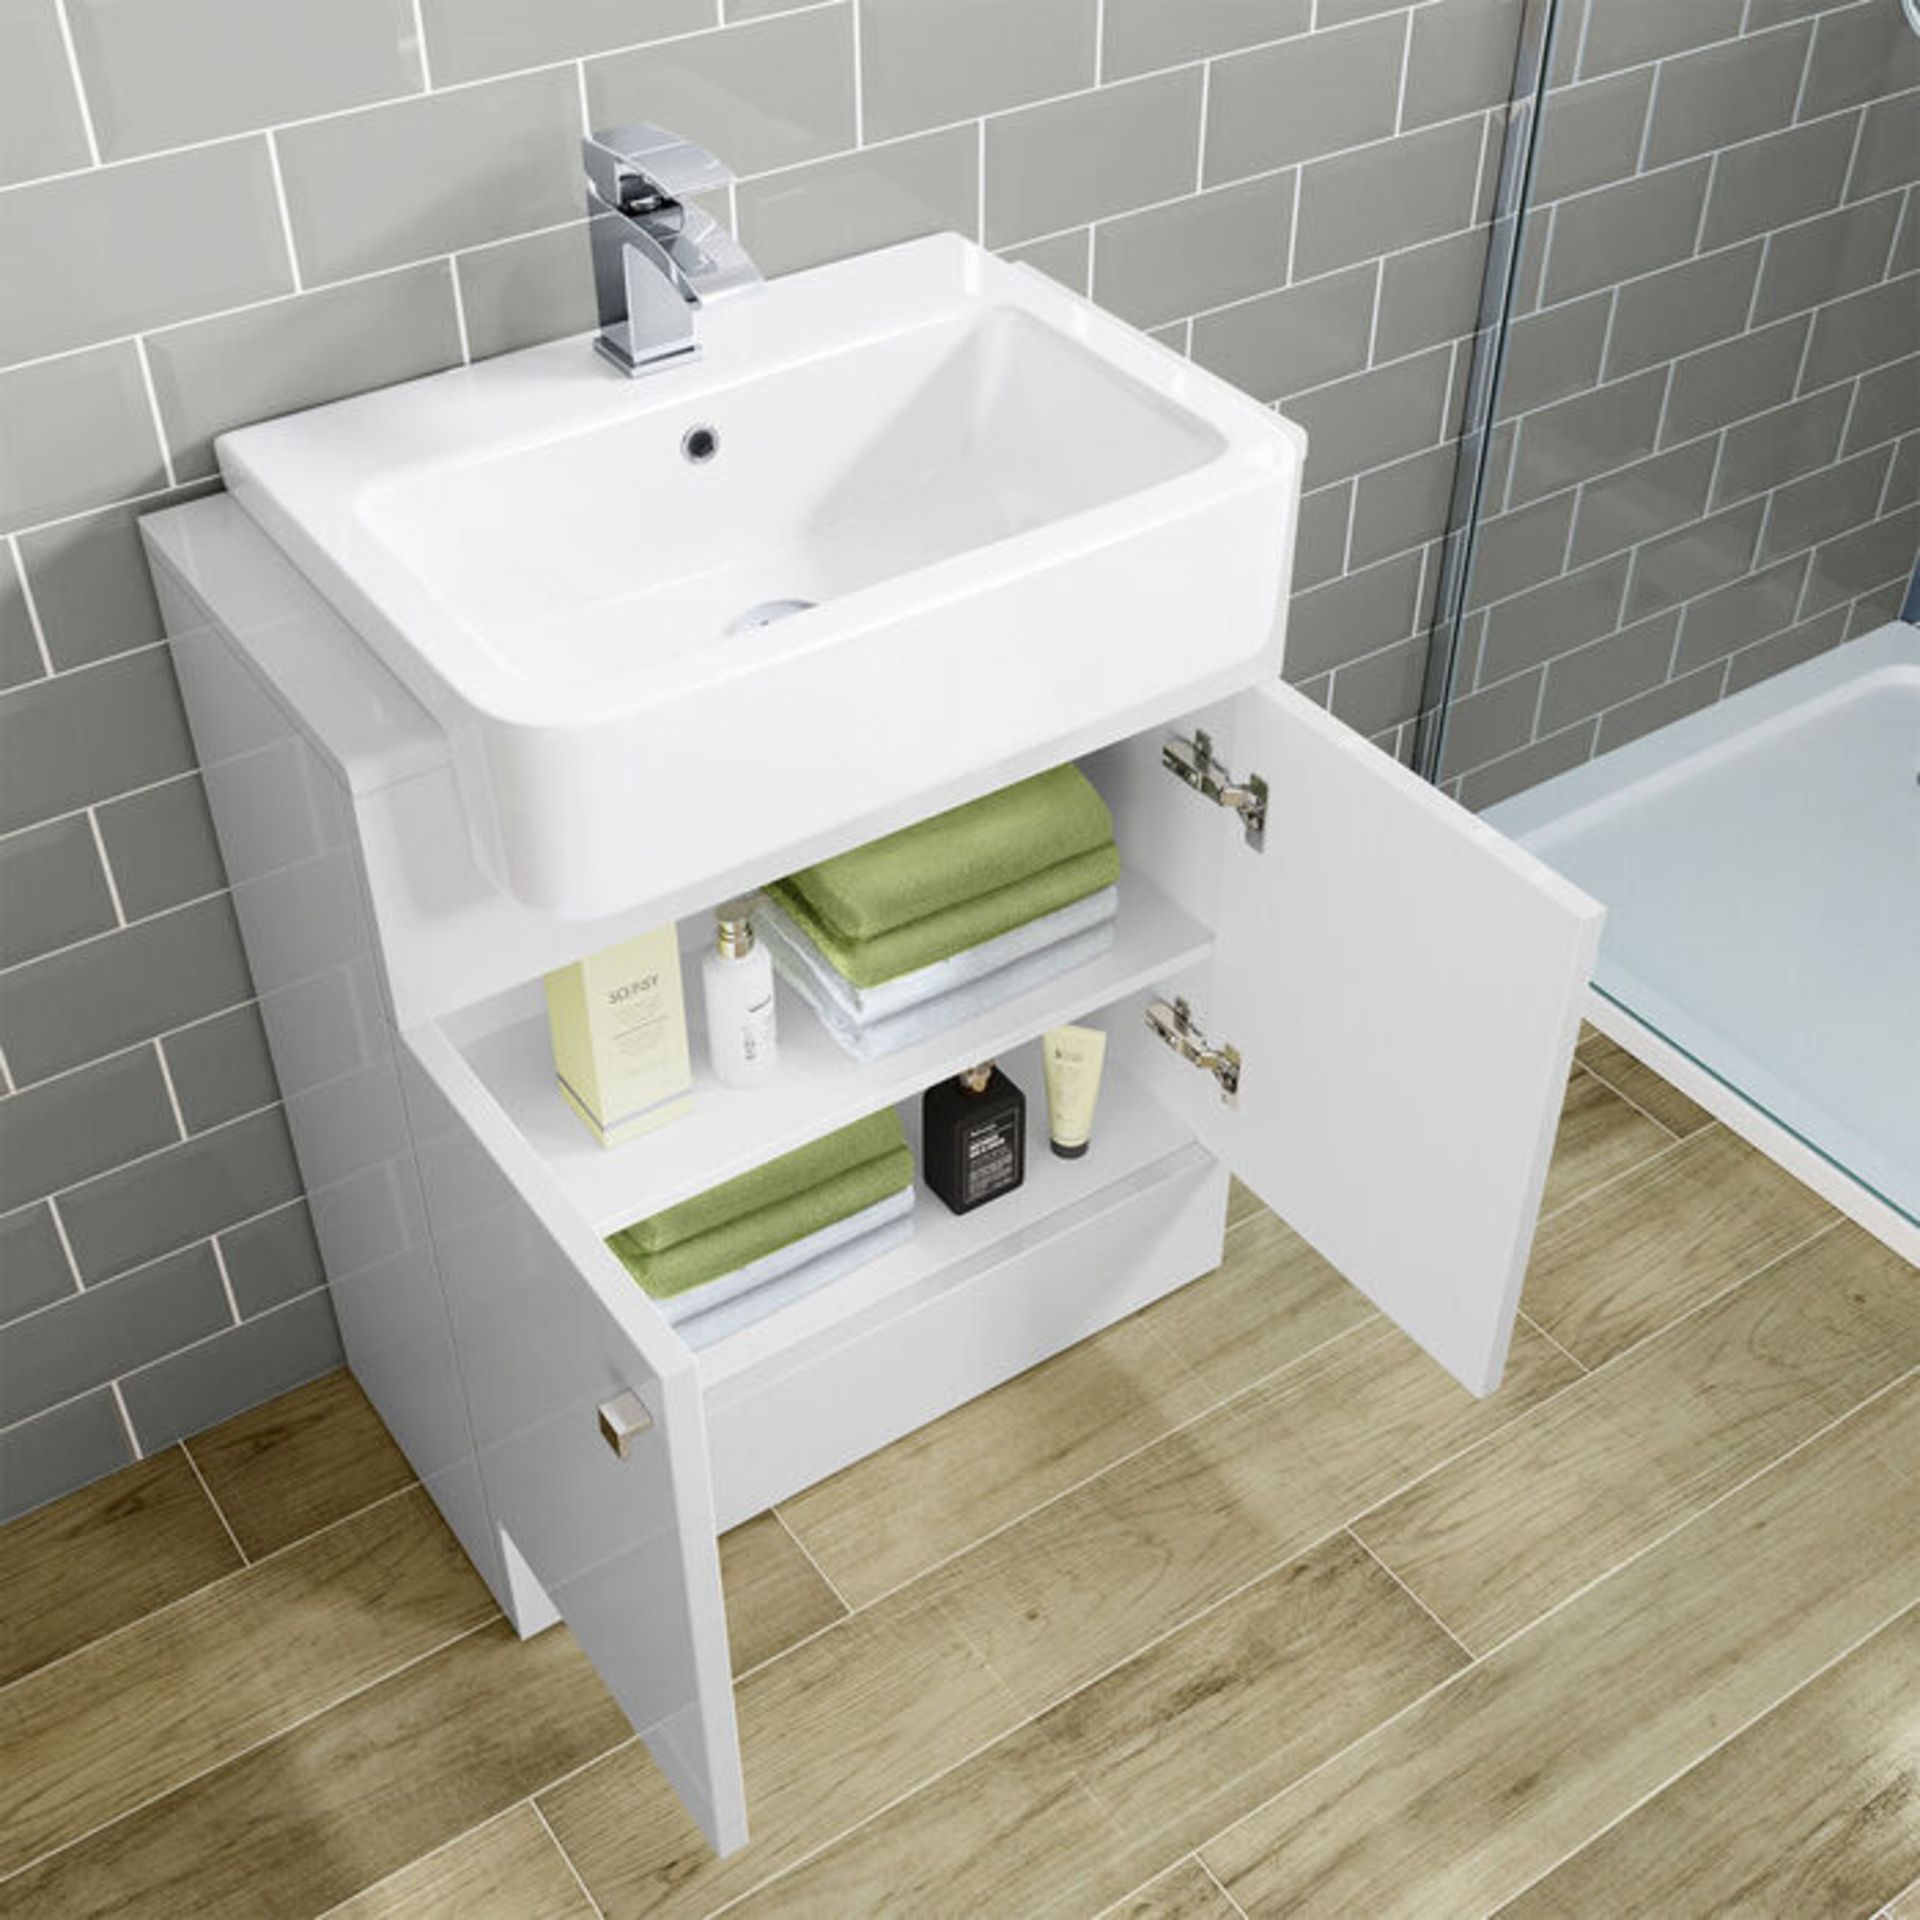 New & Boxed 660mm Harper Gloss White Sink Vanity Unit - Floor Standing. RRP £749.99.Comes Com... - Image 2 of 3